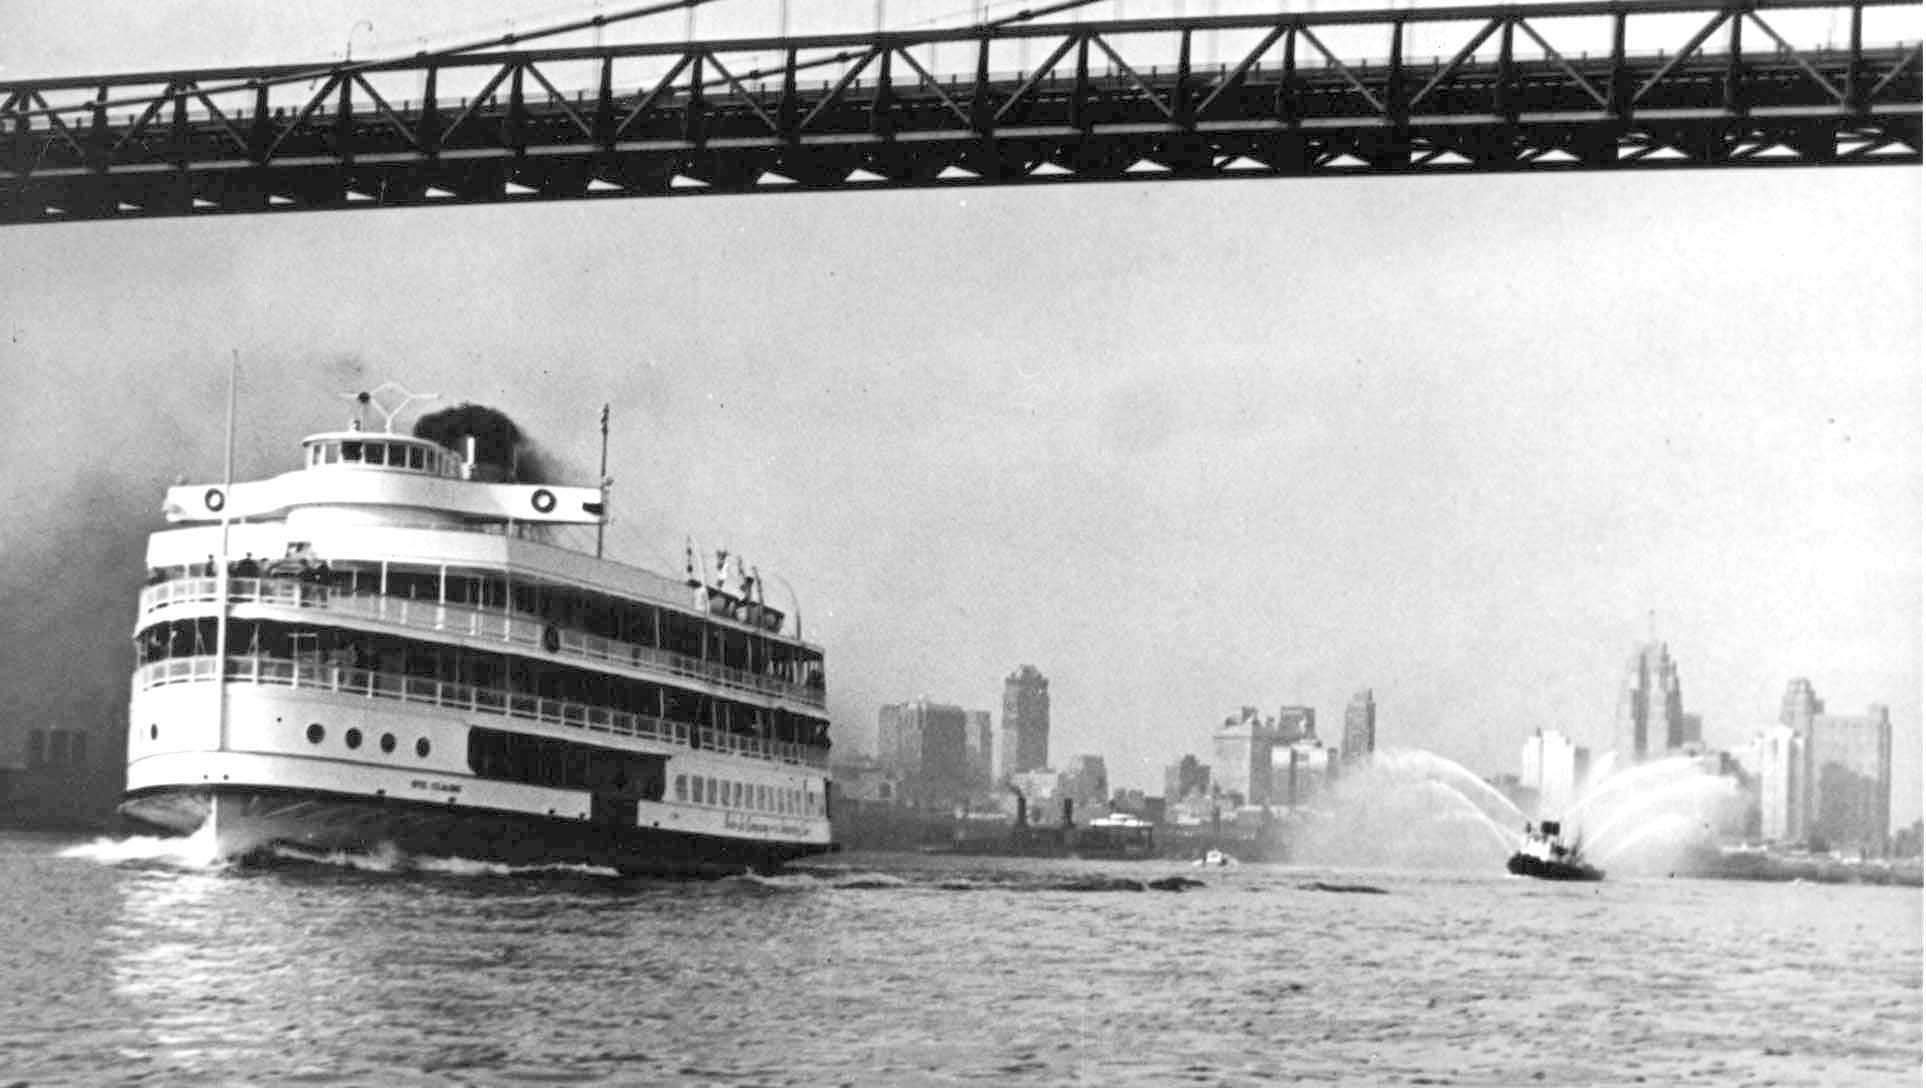 The steamship Ste. Claire passes under the Ambassador Bridge on June 19, 1967, bound for Boblo Island, Detroit's day trip getaway for much of the 20th century.